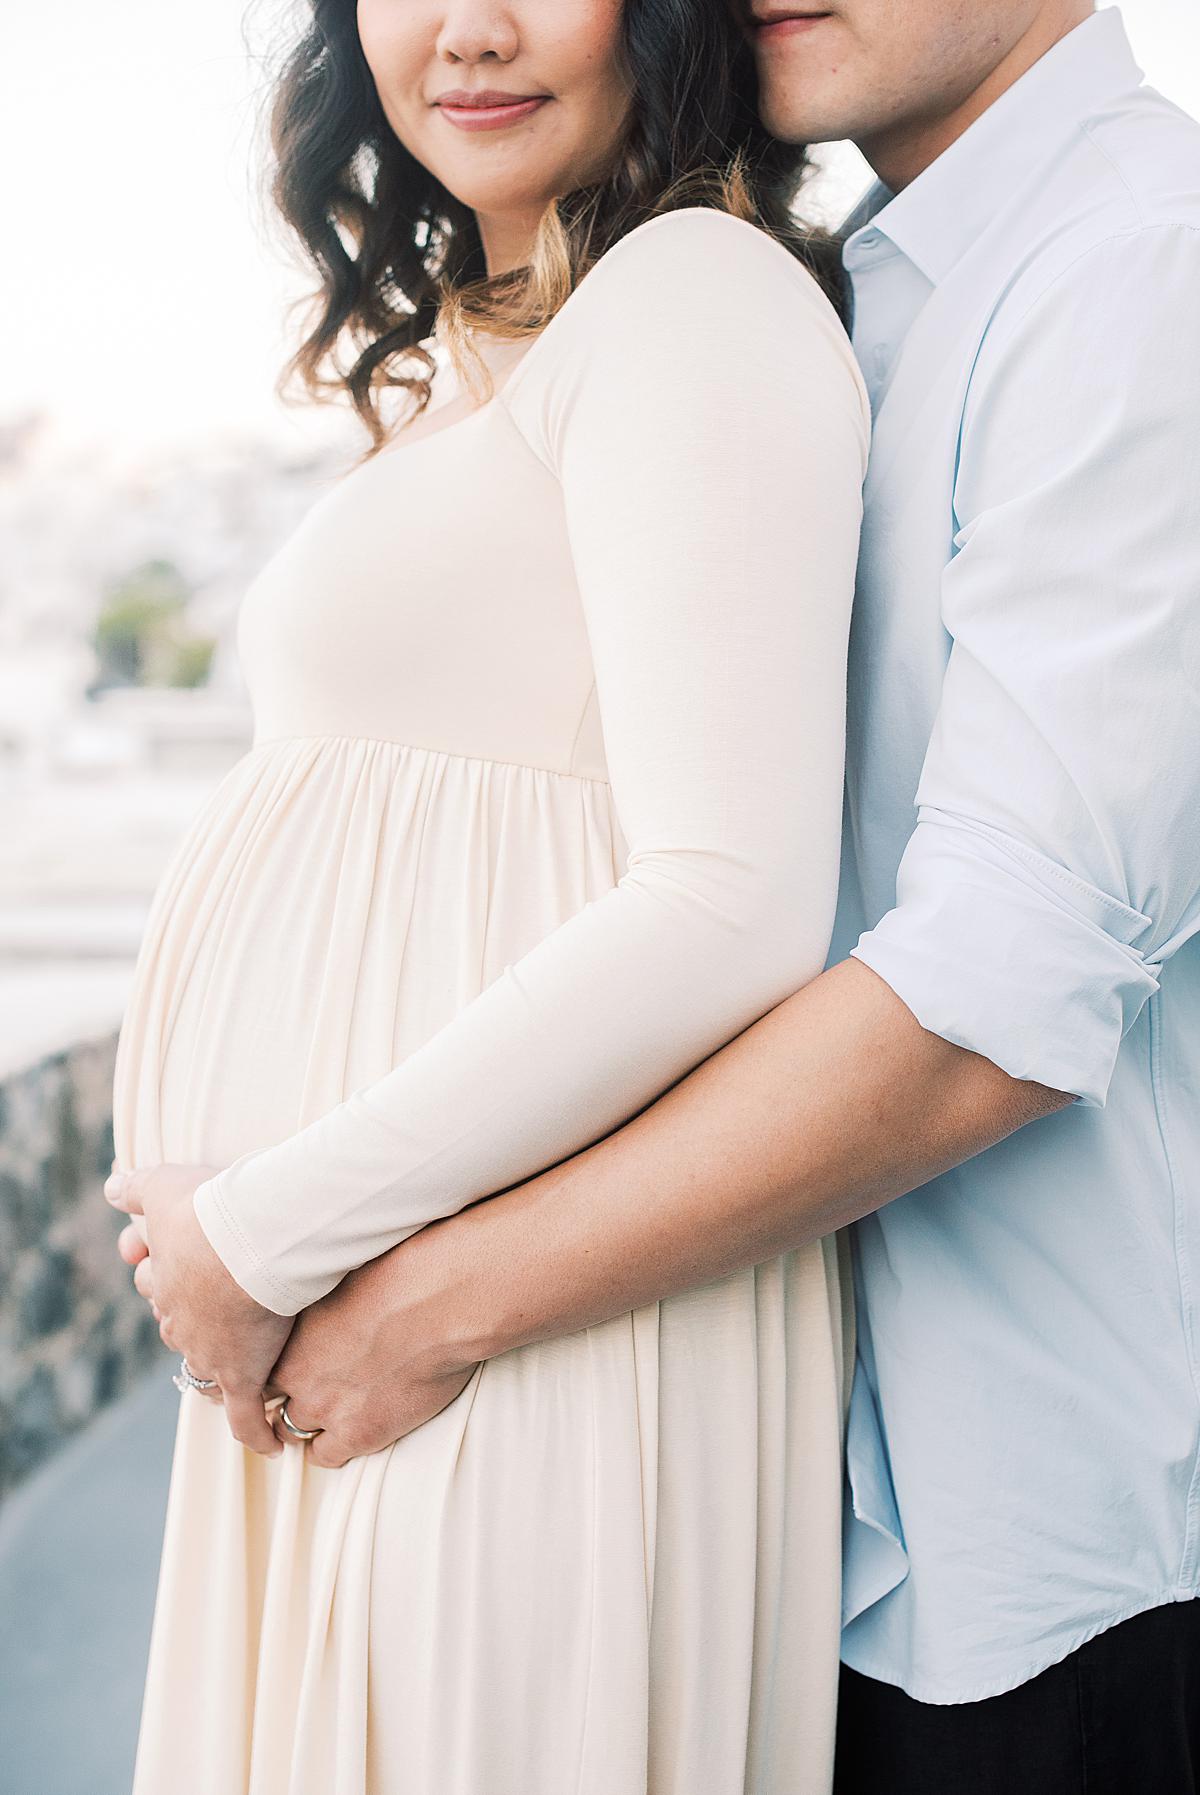 maternity session at canaves oia santorini